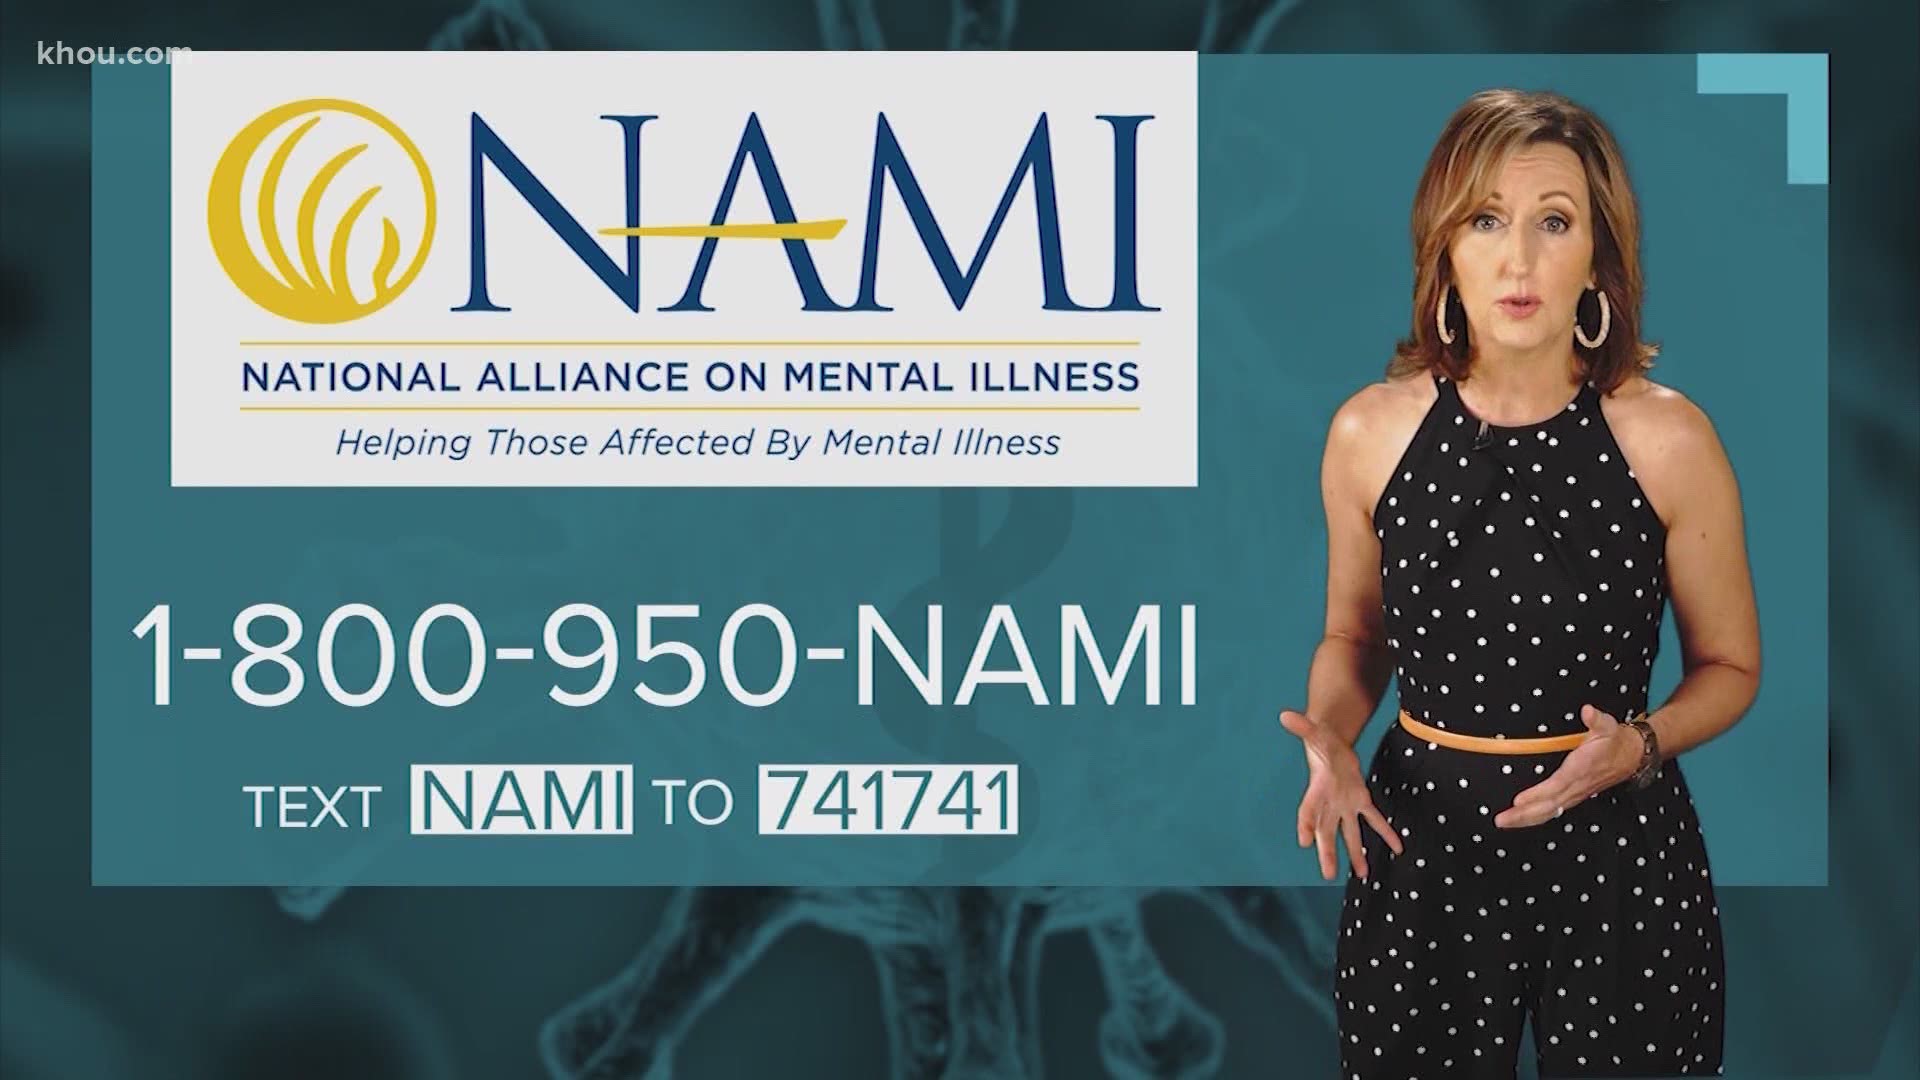 The National Alliance on Mental Illness has some resources for anyone struggling with mental health. Call 1-800-950-NAMI or text ‘NAMI’ to 741741.